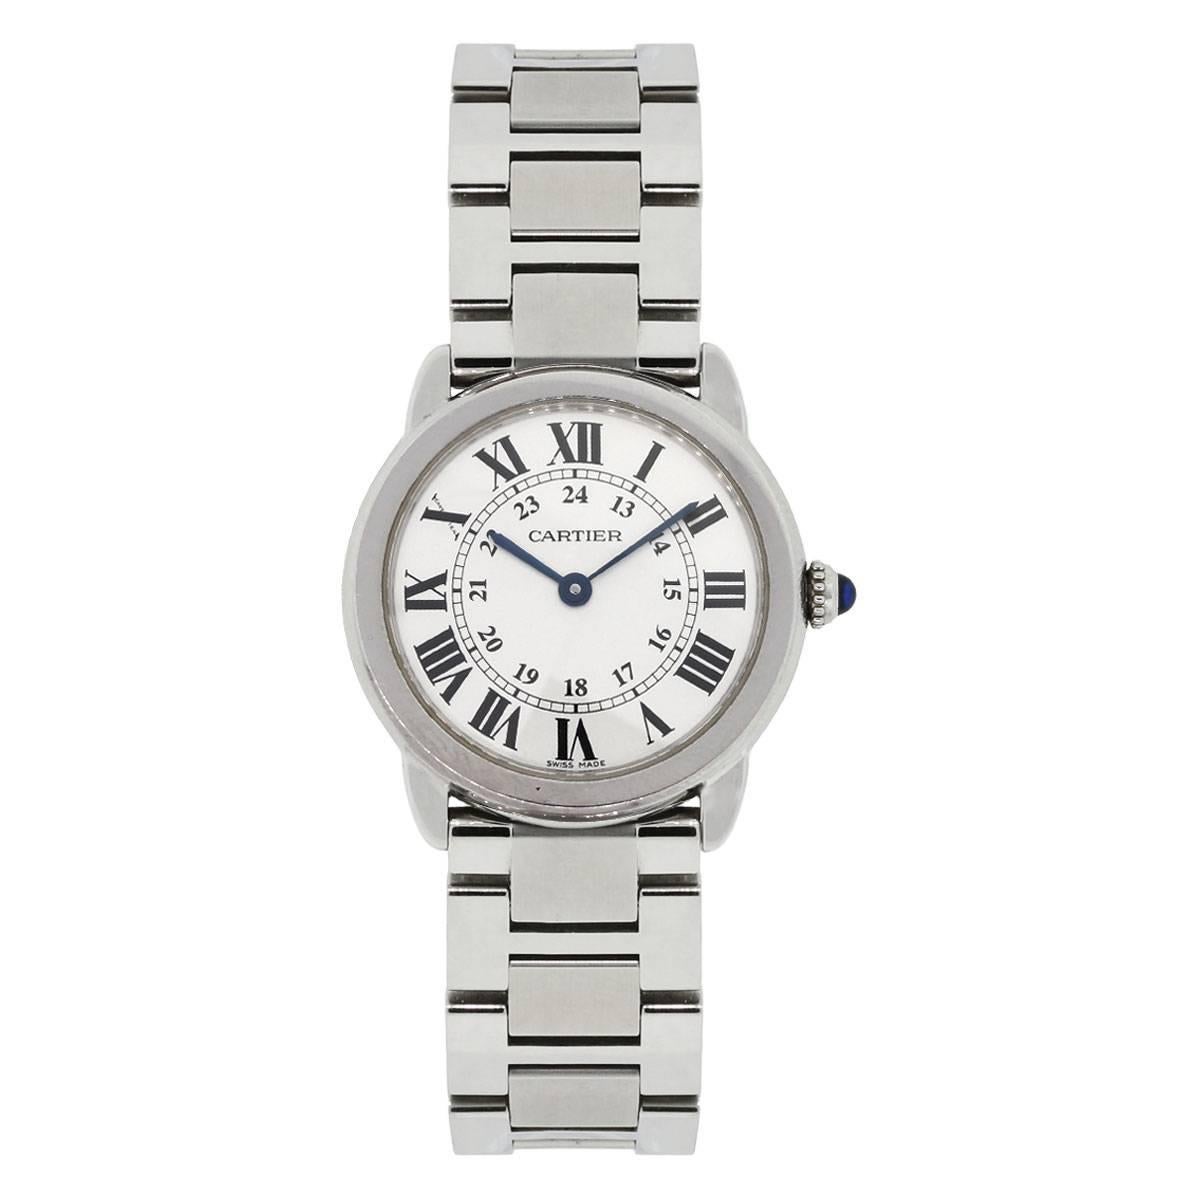 Brand: Cartier
MPN: 3601
Model: Ronde Solo
Case Material: Stainless steel
Case Diameter: 30mm
Crystal: Sapphire crystal
Bezel: Fixed smooth stainless steel bezel
Dial: Silvered roman dial with blue hands
Bracelet: Stainless steel link bracelet
Size: